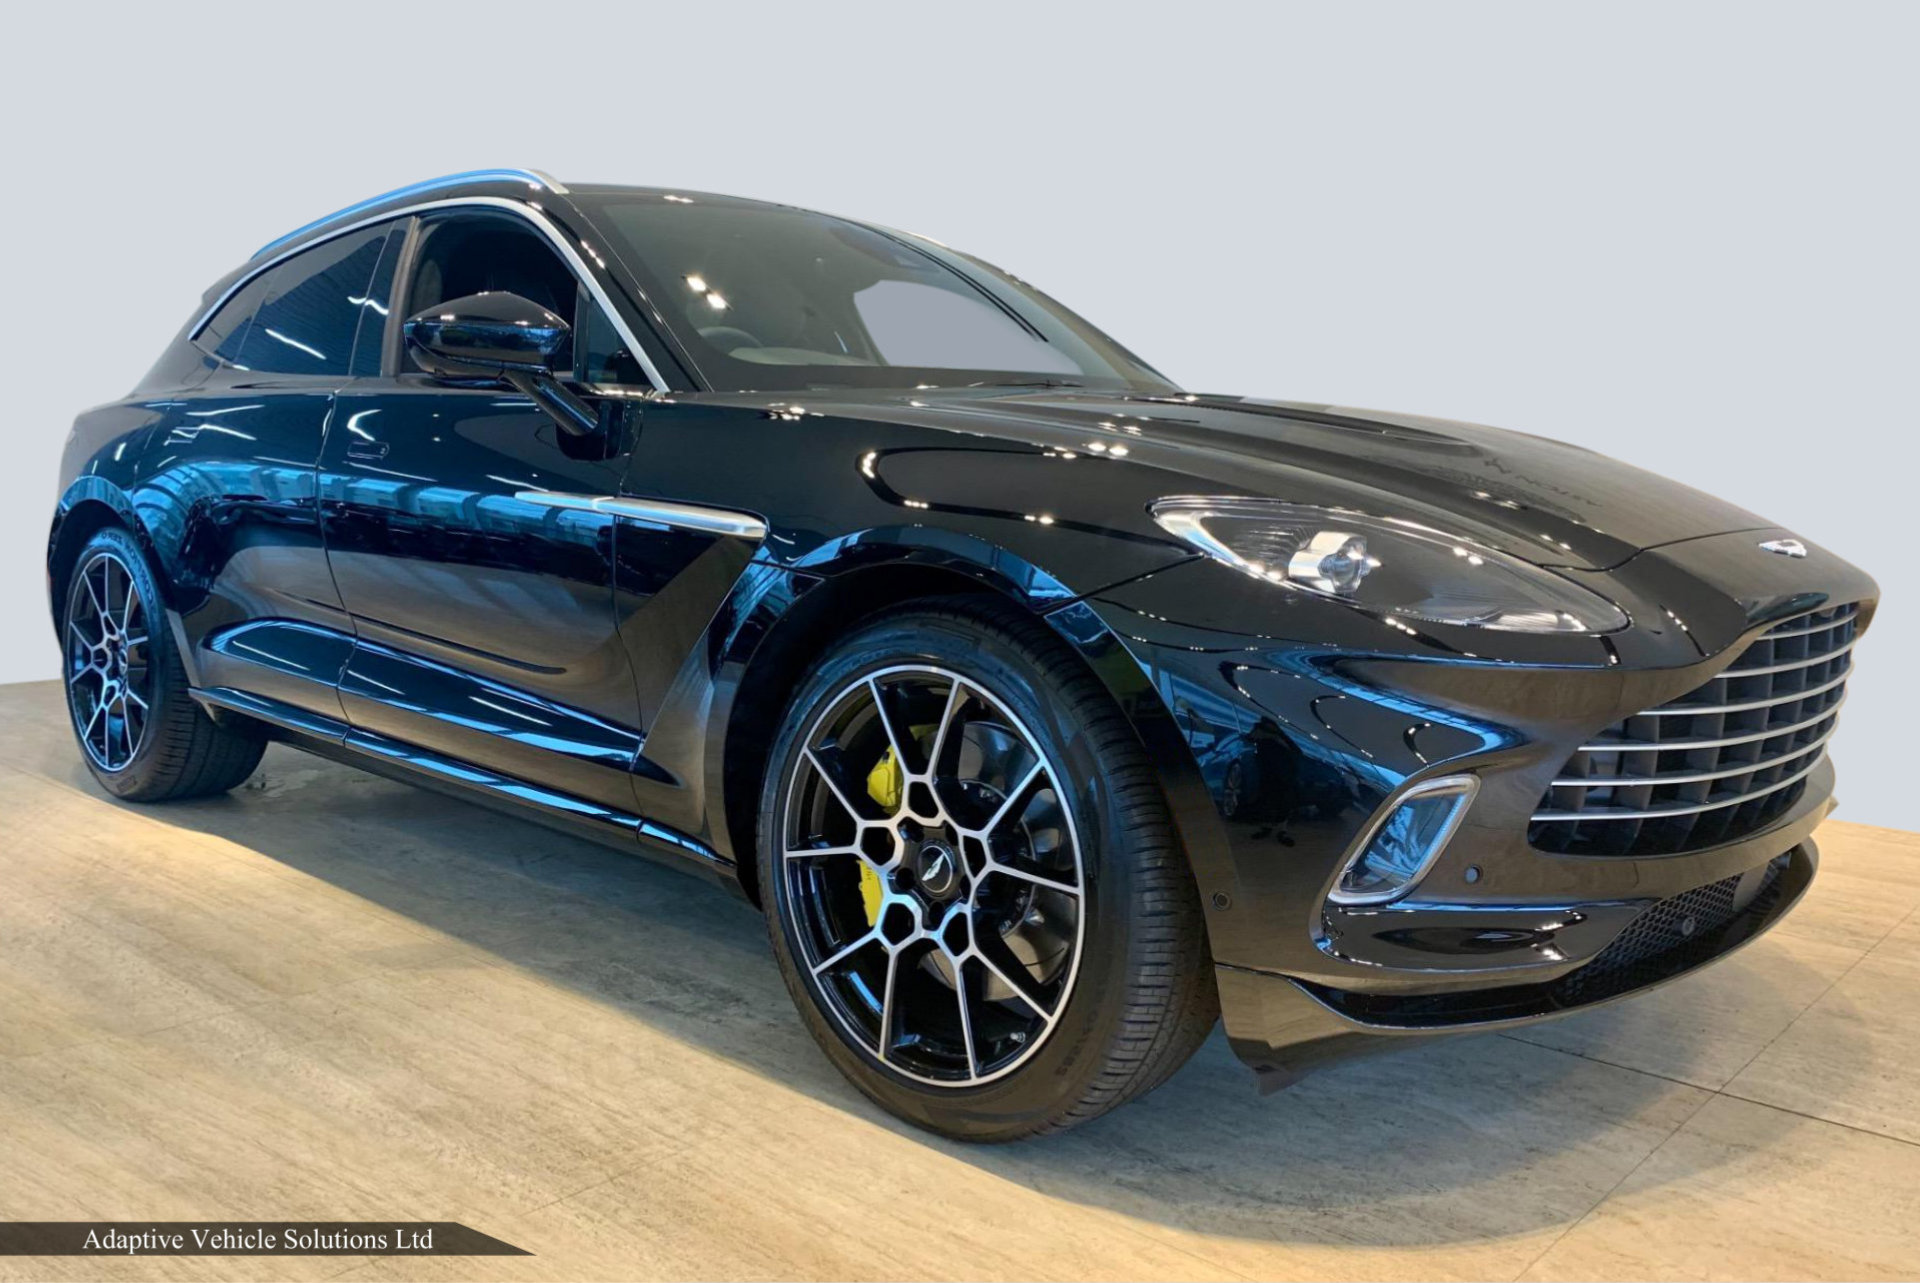 2021 Aston Martin DBX Black off side front view